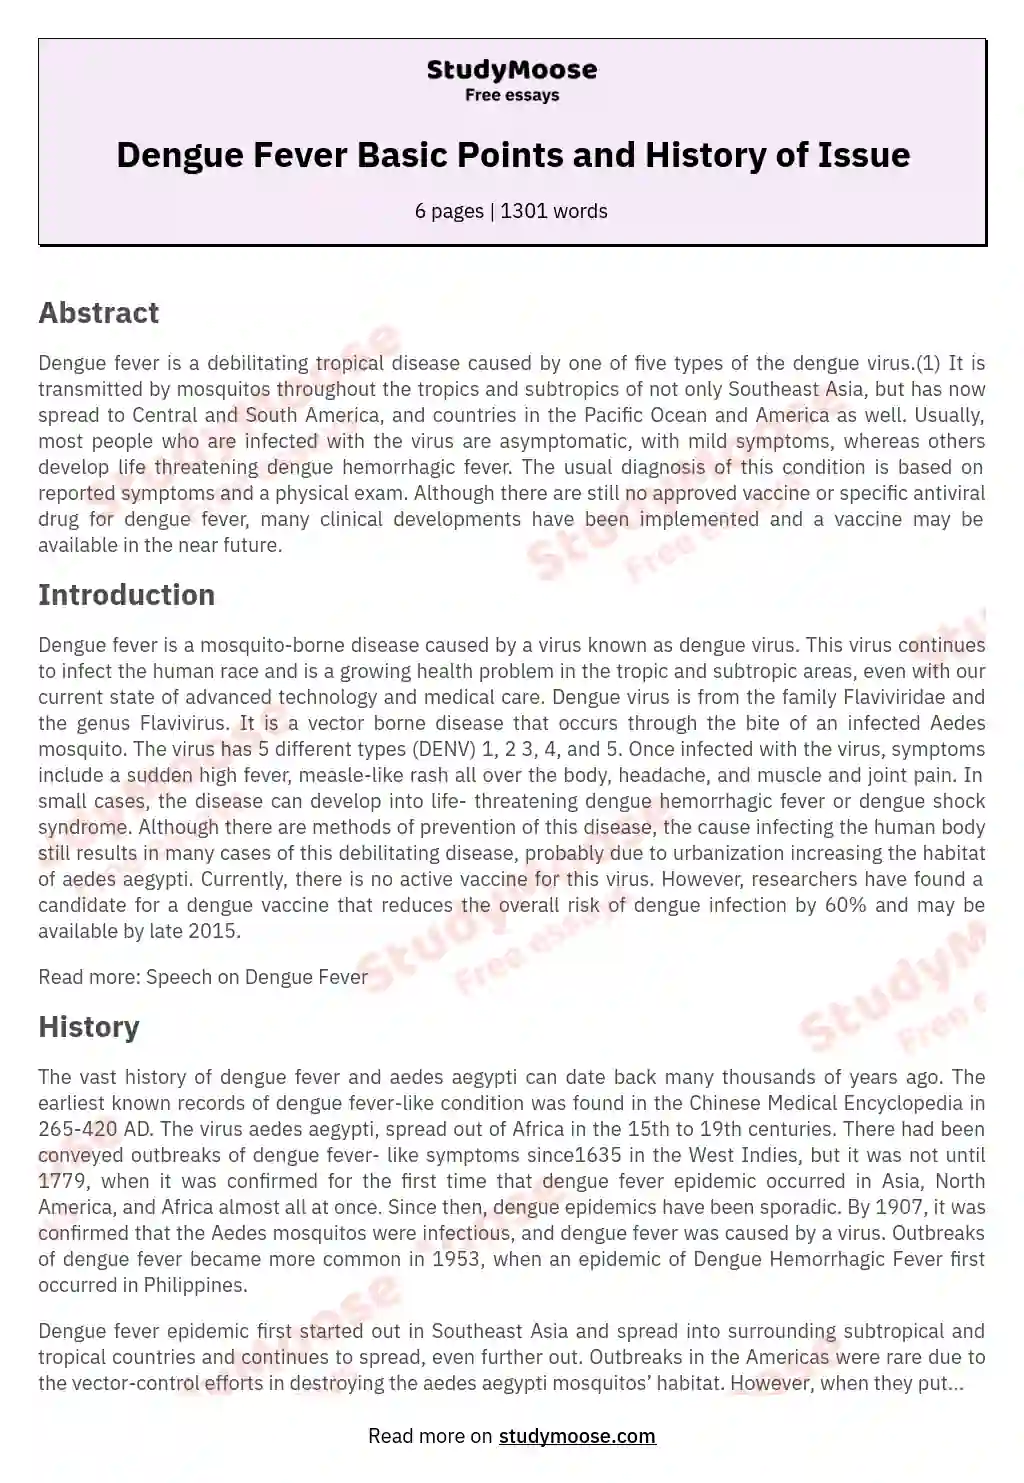 Dengue Fever Basic Points and History of Issue essay